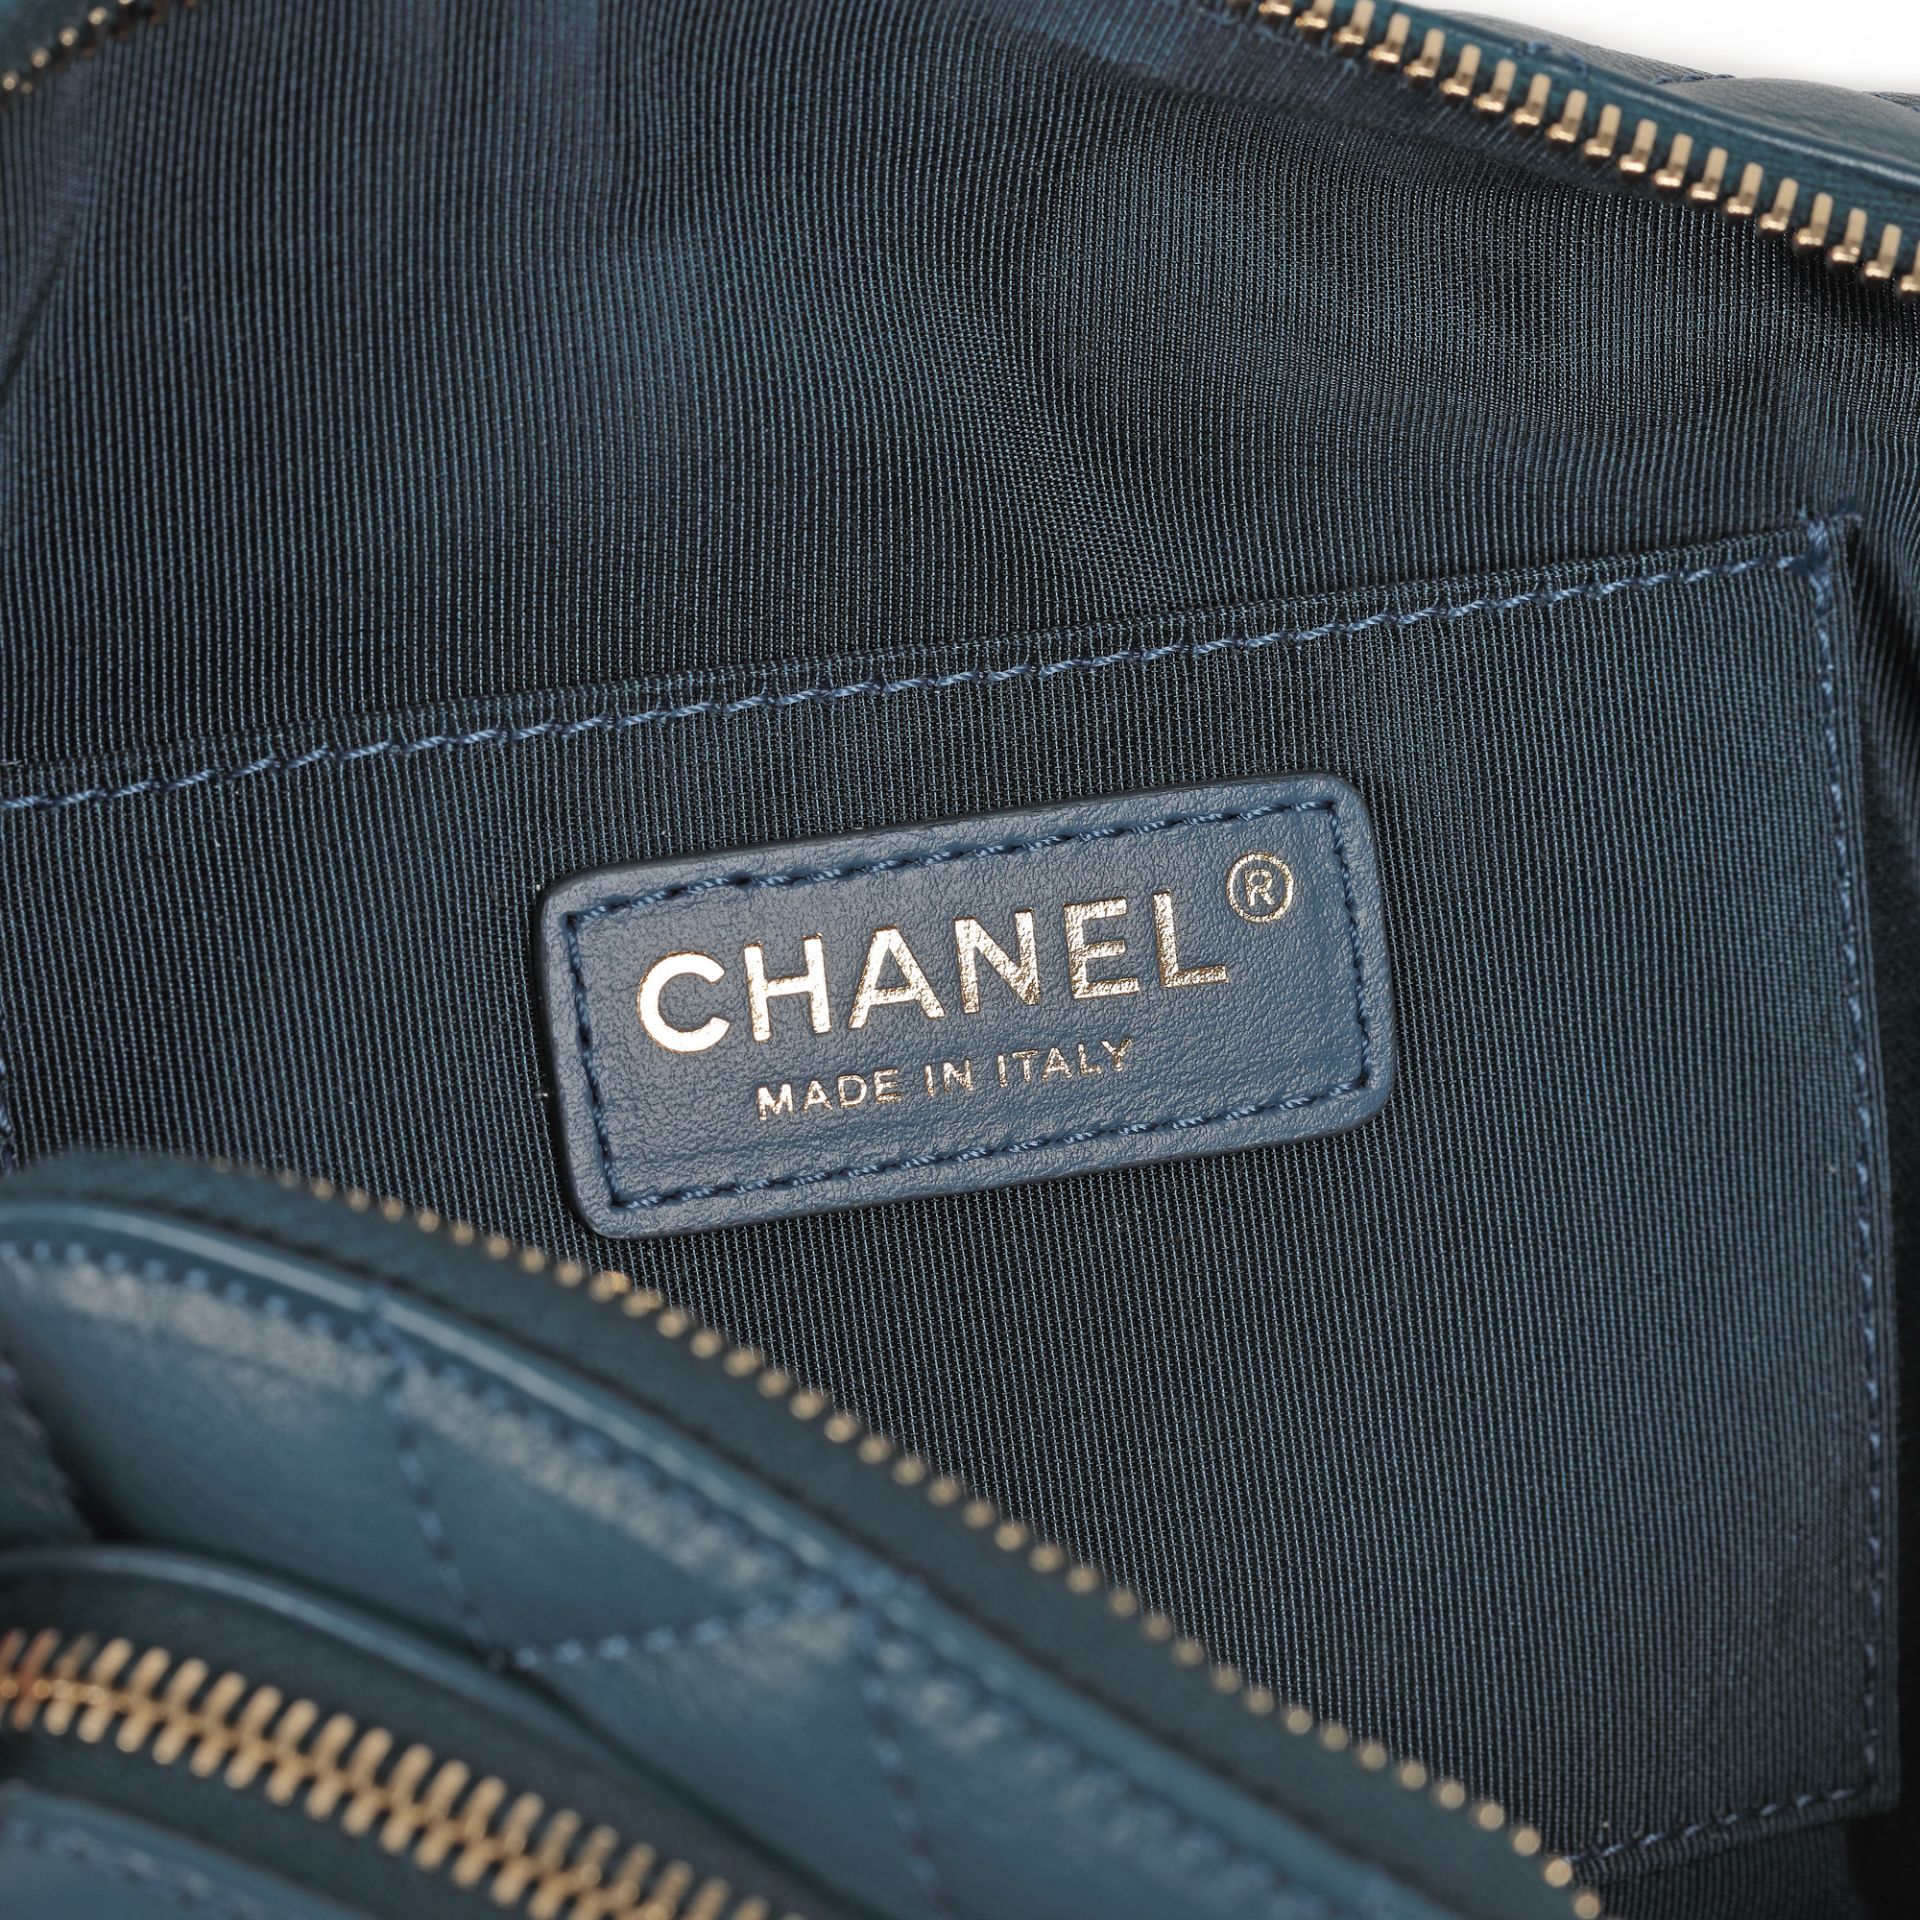 Chanel carrying case, quilted leather, blue - Image 5 of 5